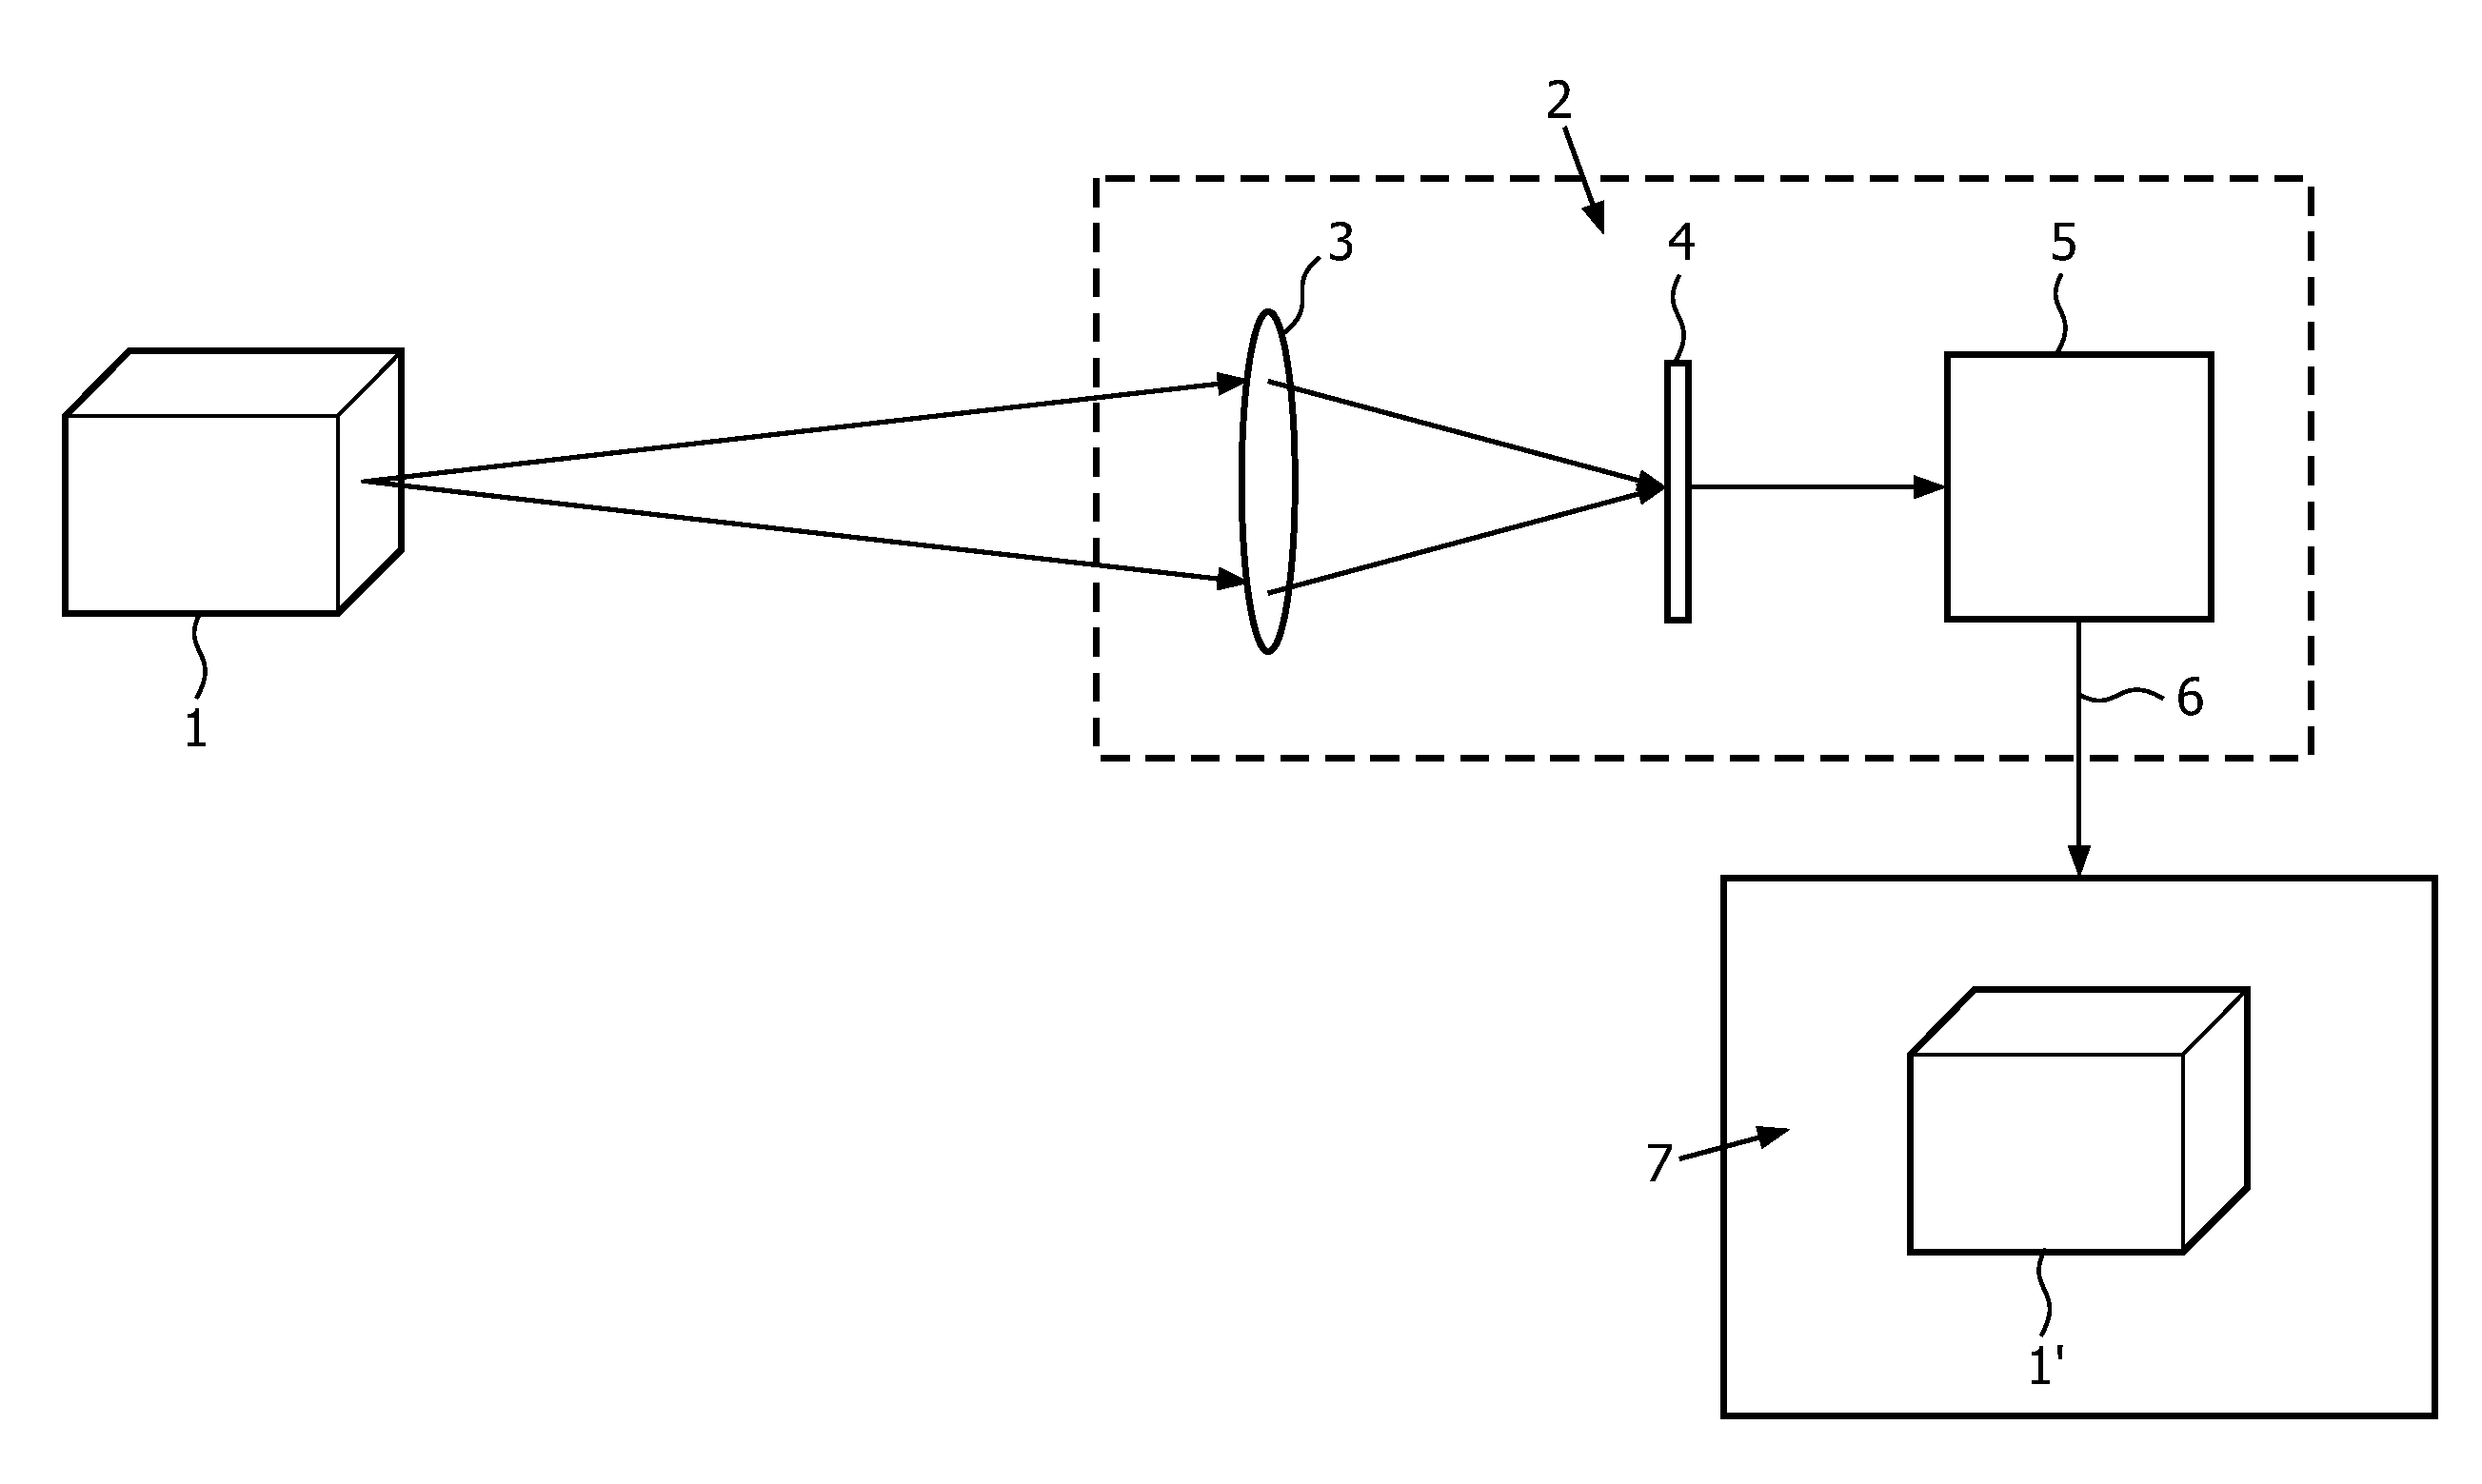 Stereoscopic image capturing method, system and camera